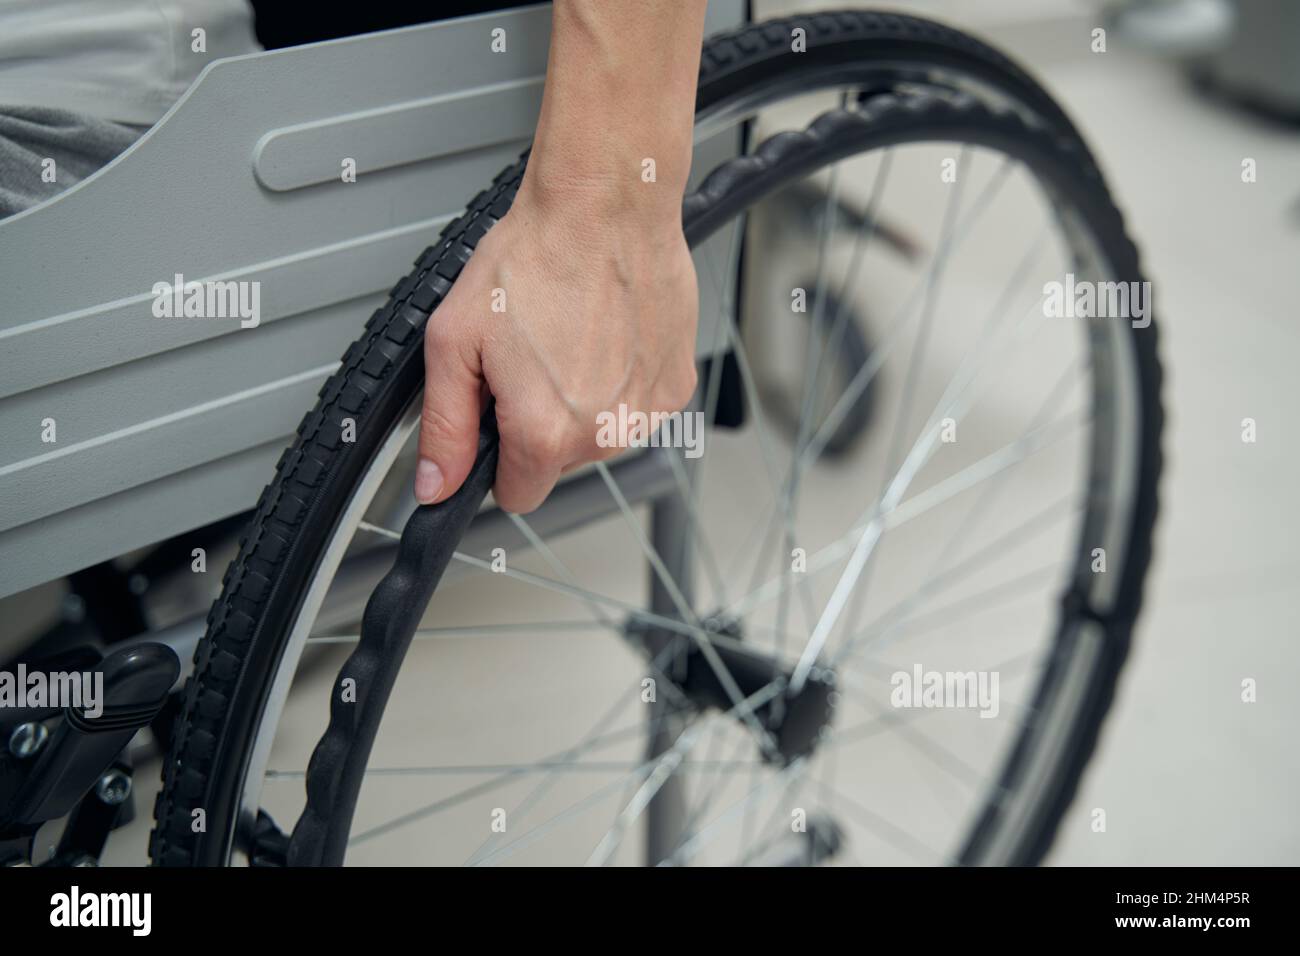 Person with disability using manually-propelled chair indoors Stock Photo